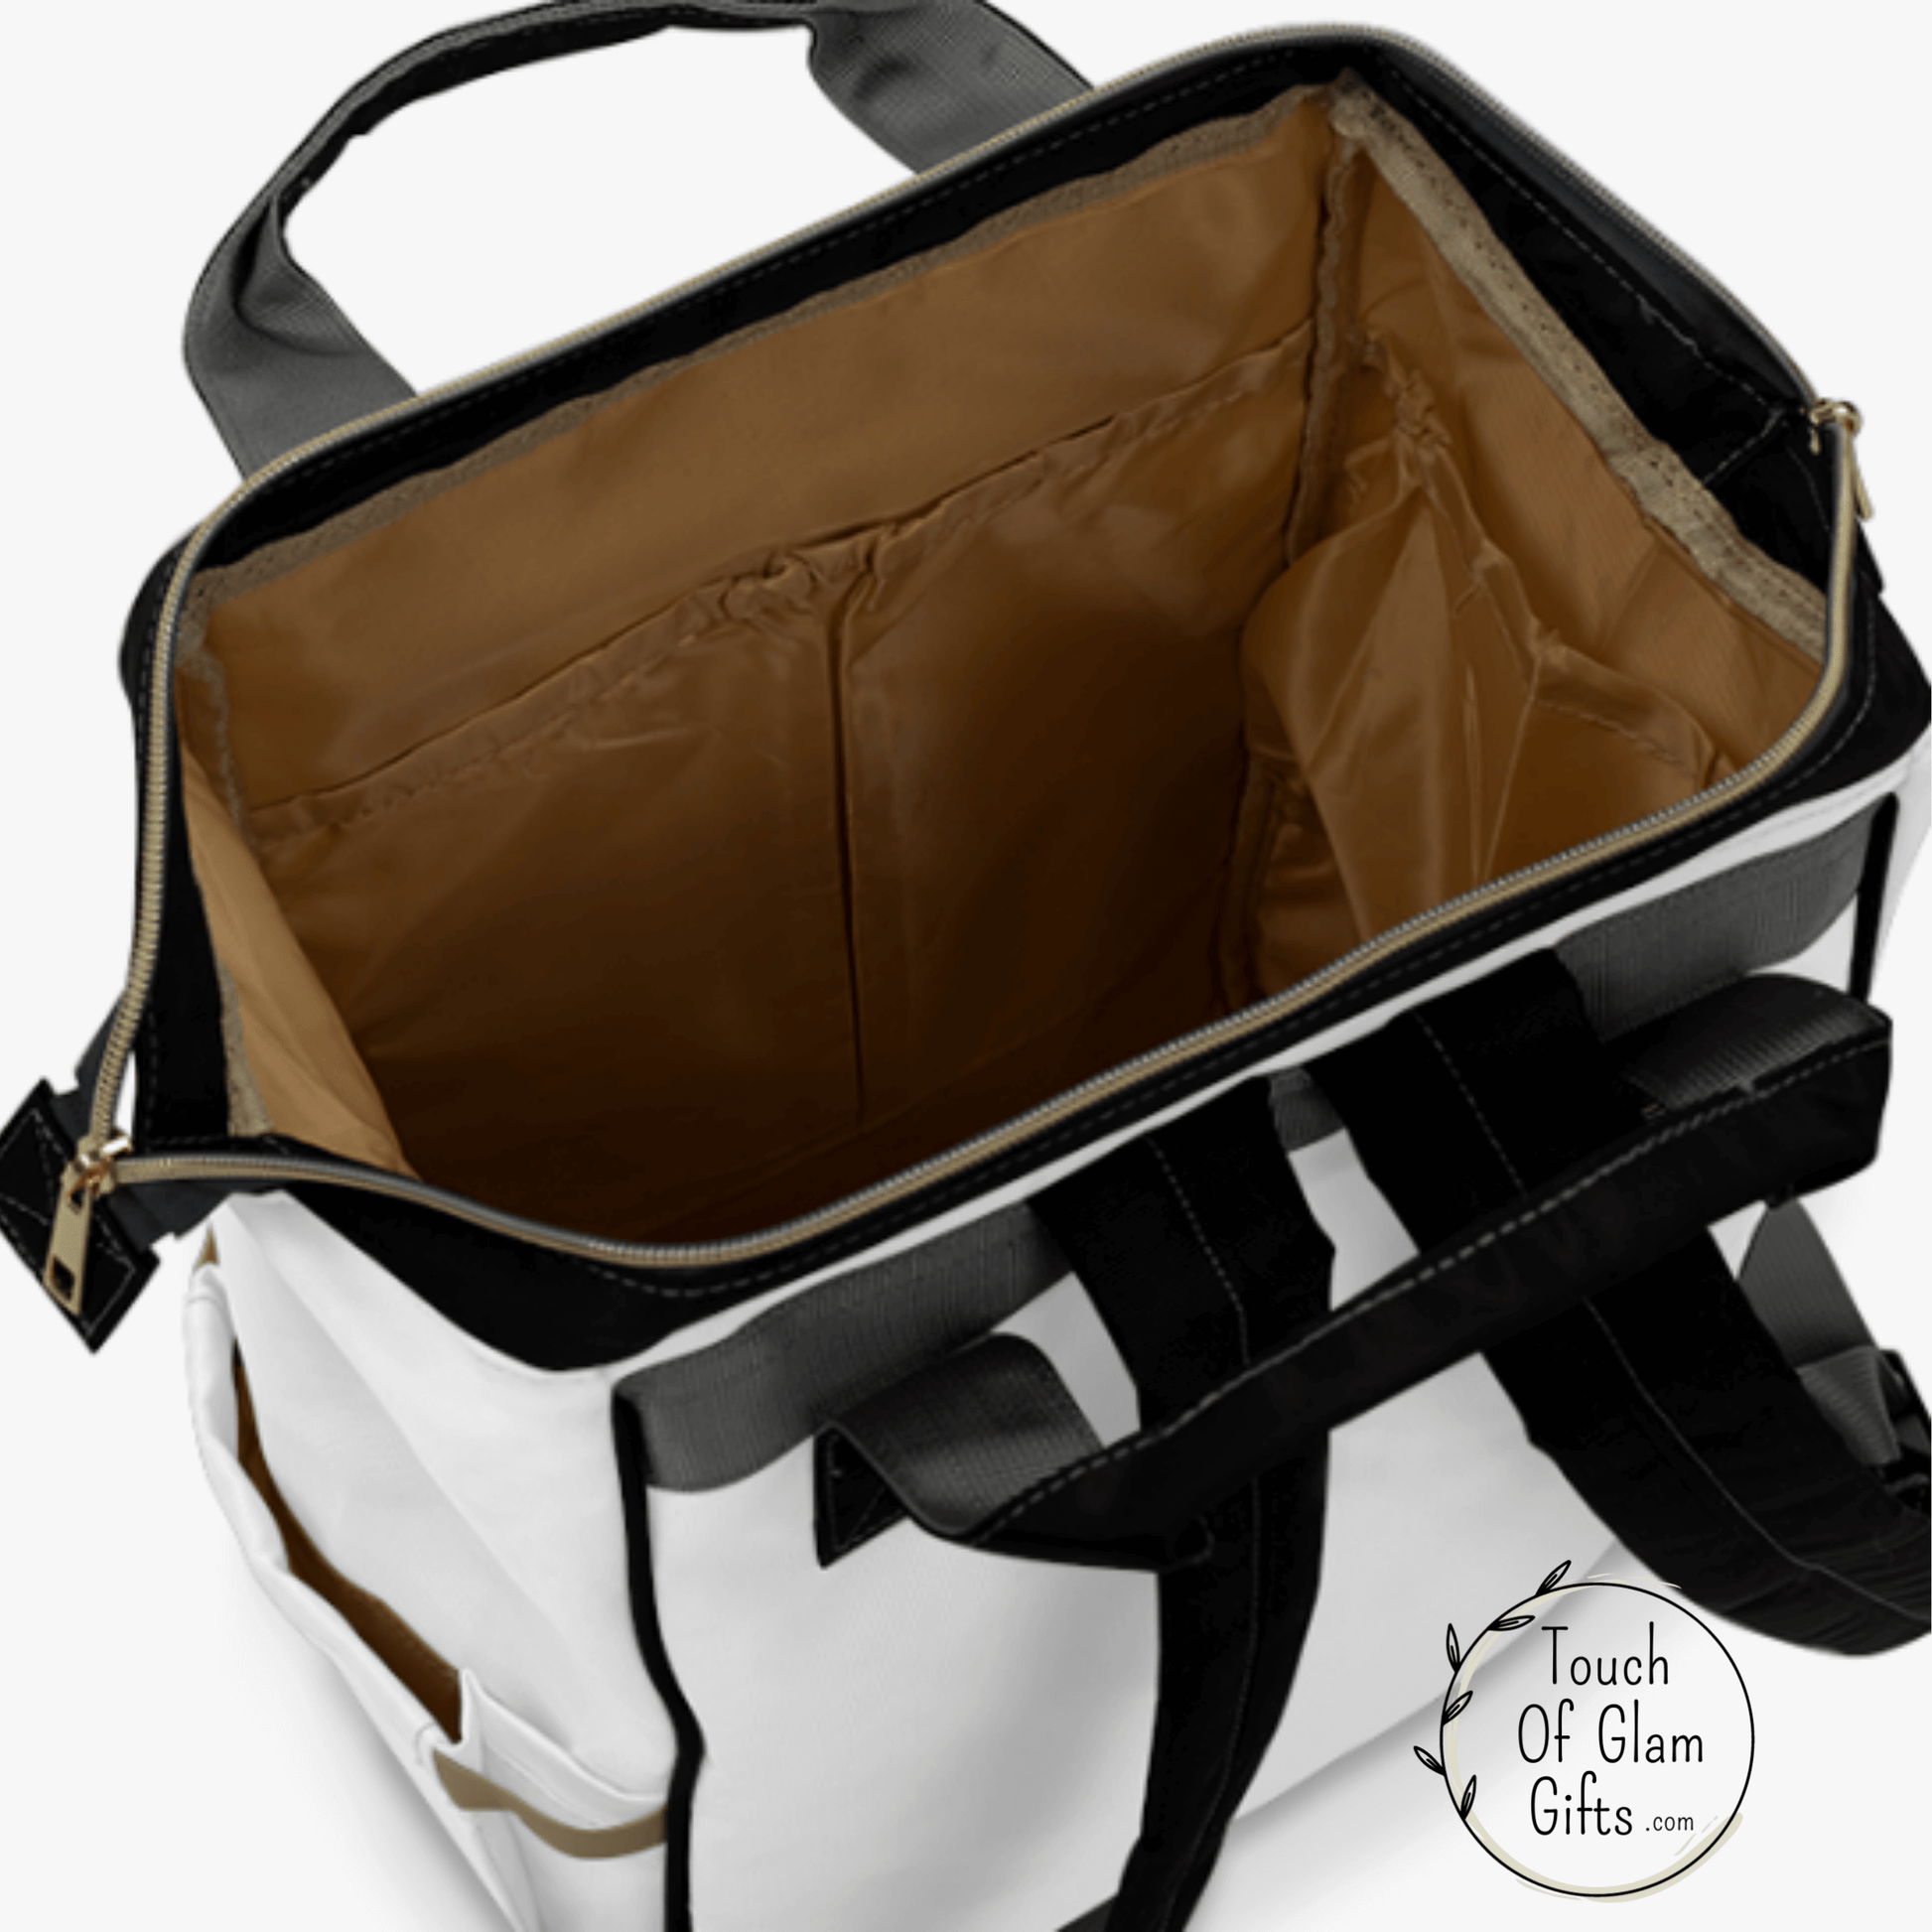 The inside of the backpack shows the bag stands up on its own making it easy to get your things. There are multiple storage compartments on the sides and the tan color is a washable wipe clean material.